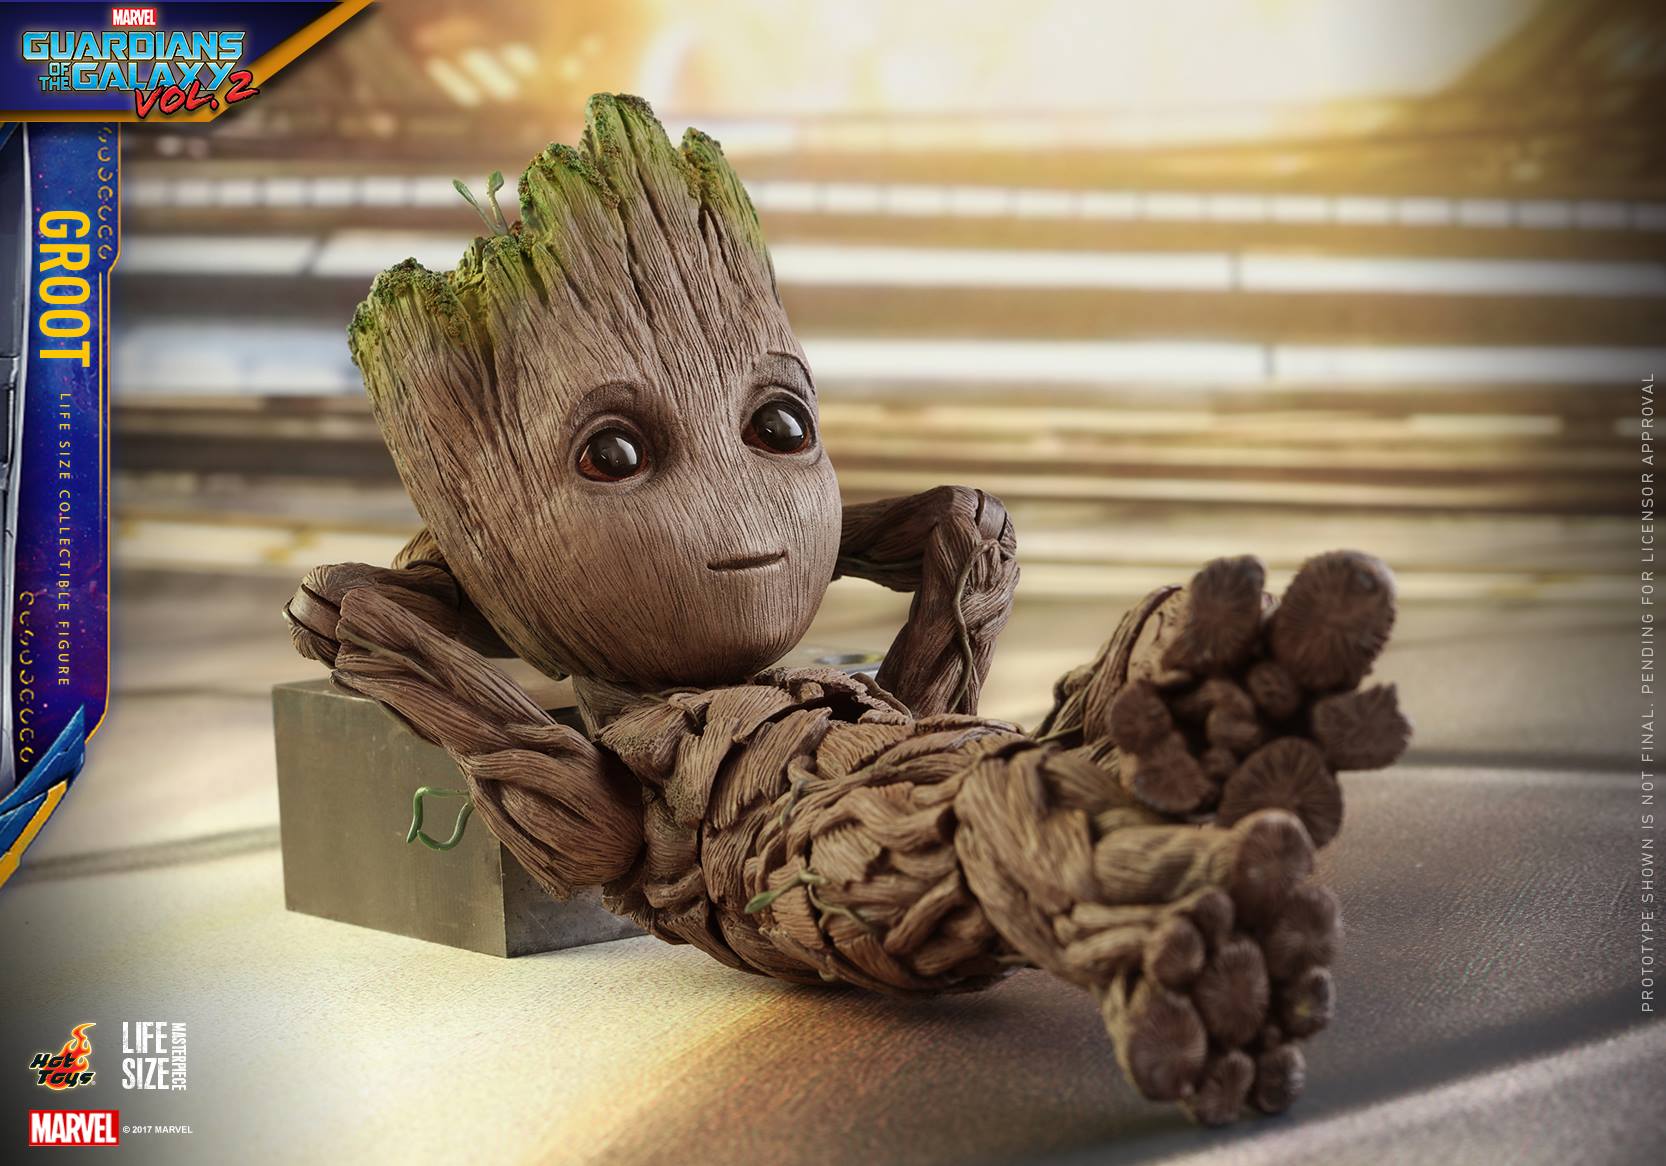 Hot Toys Life-Size Baby Groot Figure Up For Order! - Marvel Toy News